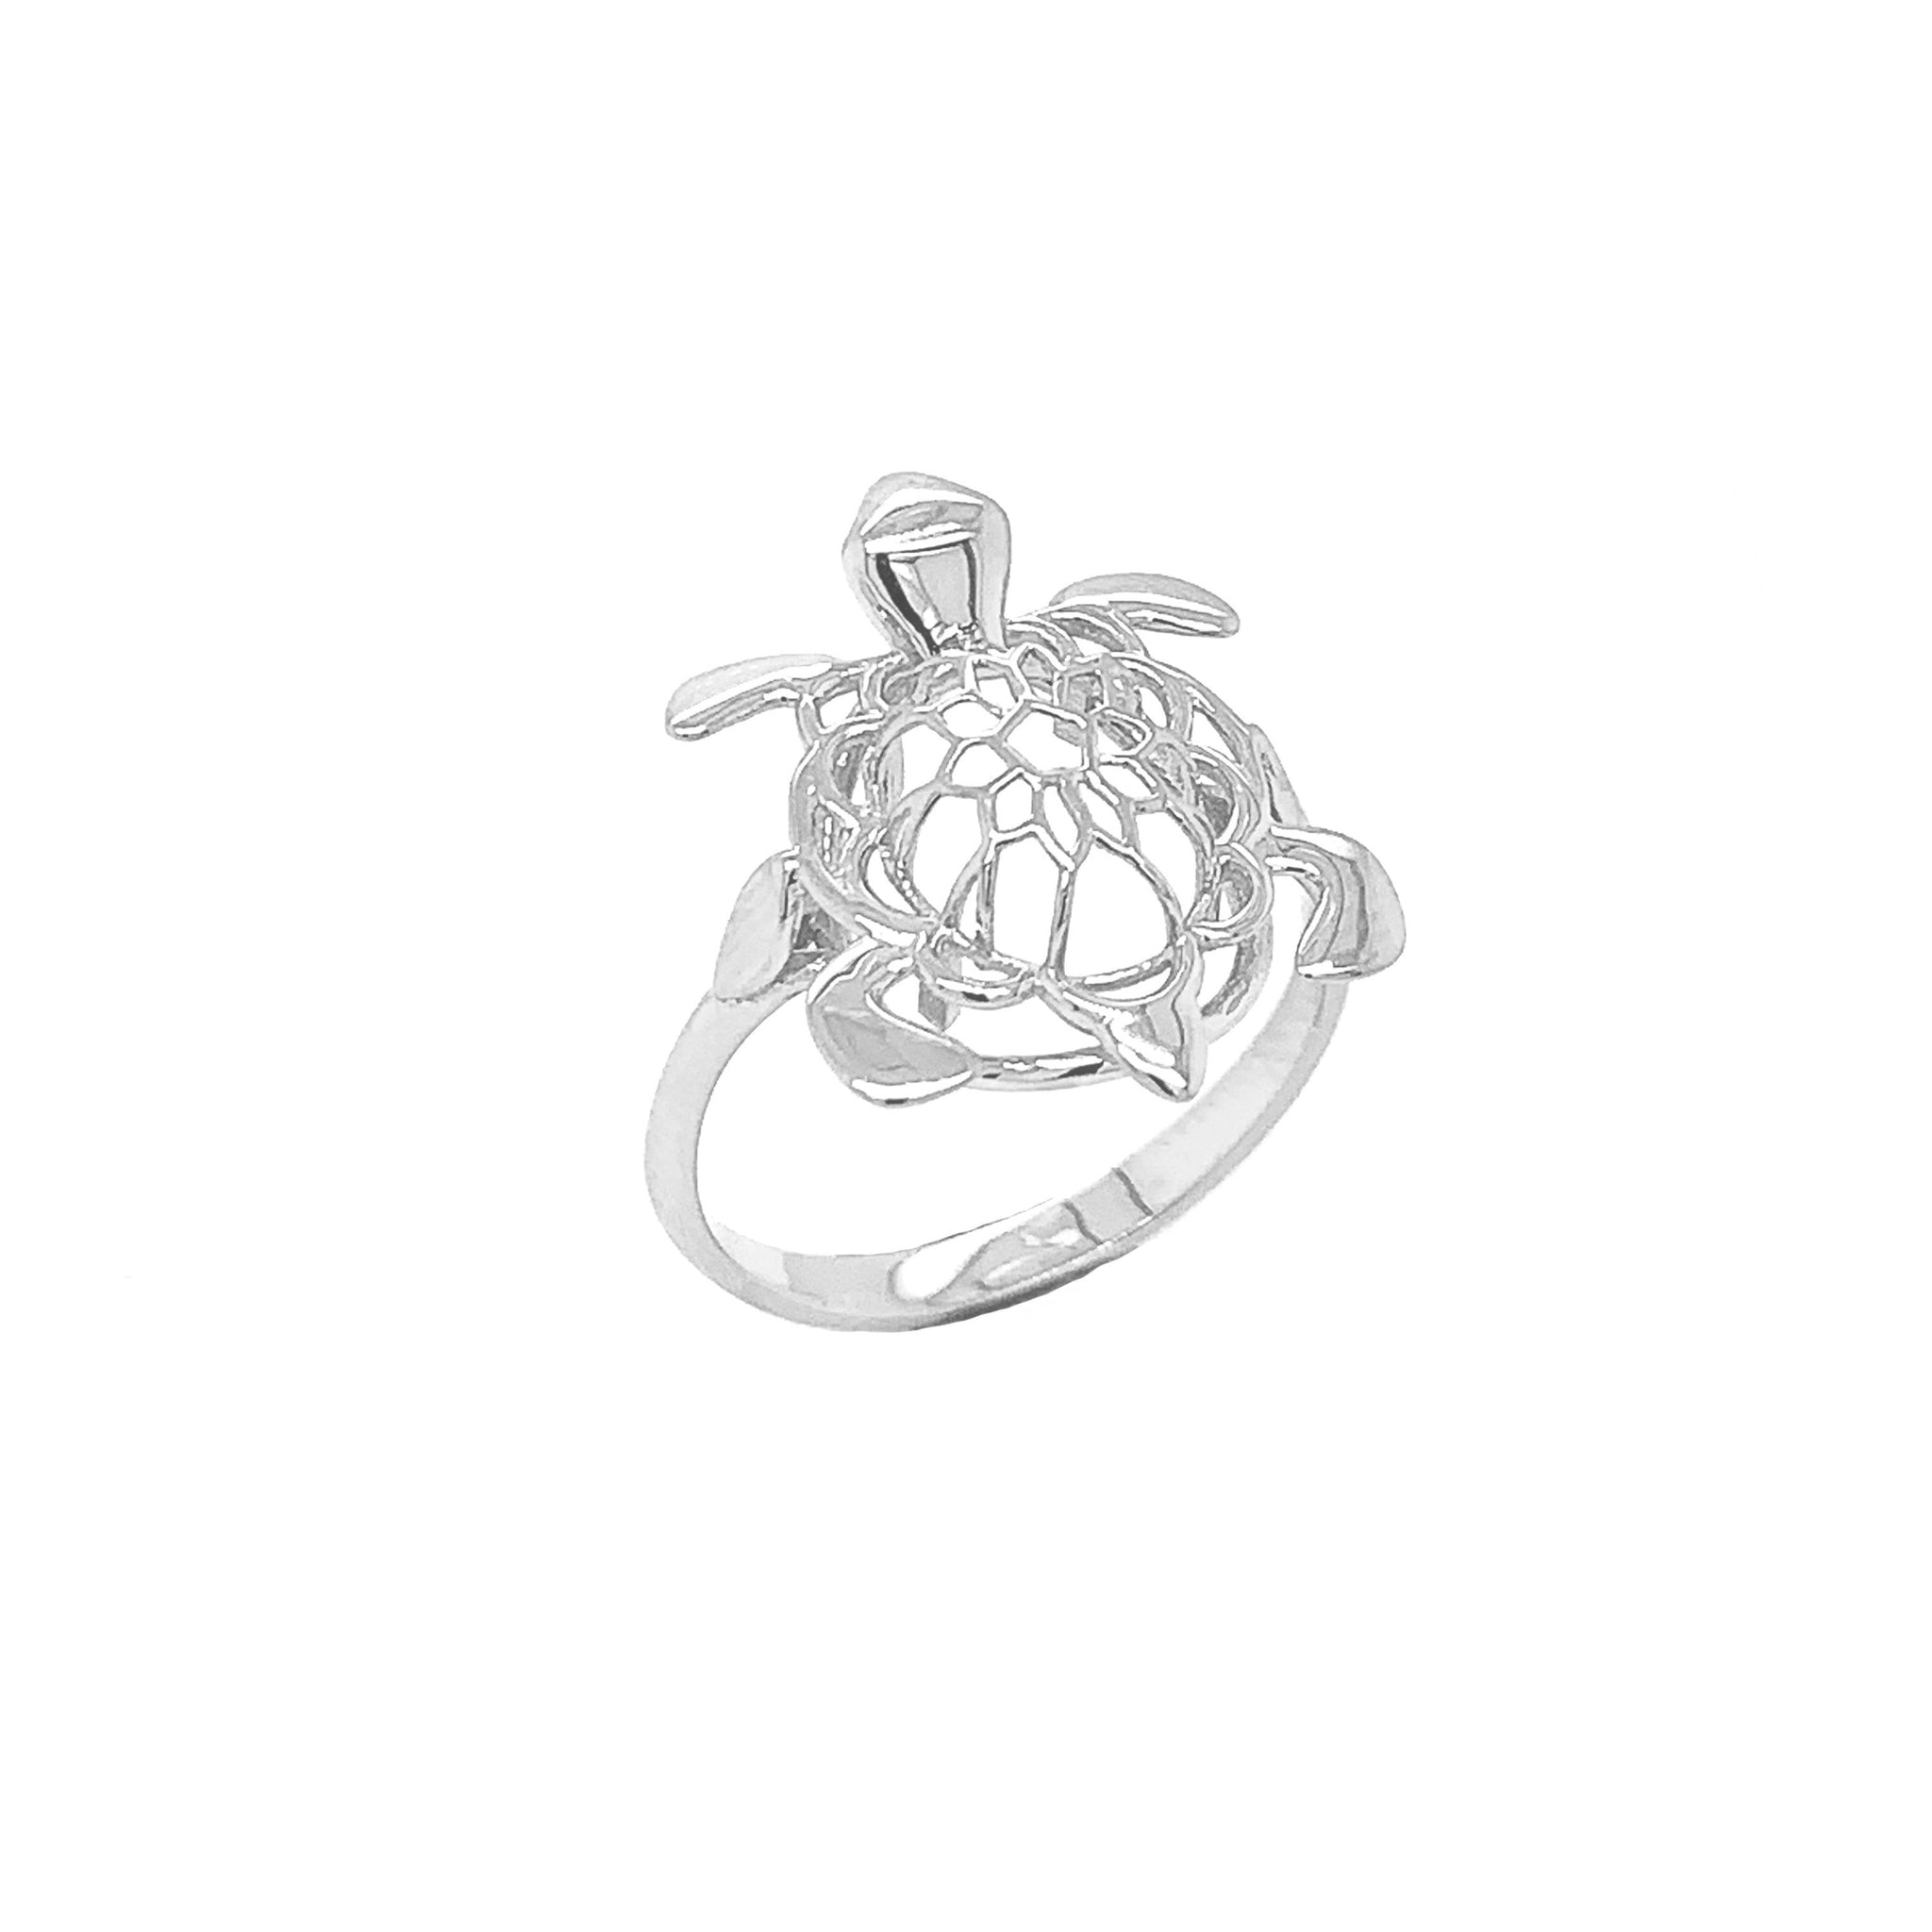 Turtle Wisdom and Patience Statement Ring in Sterling Silver from Rafi's Jewelry